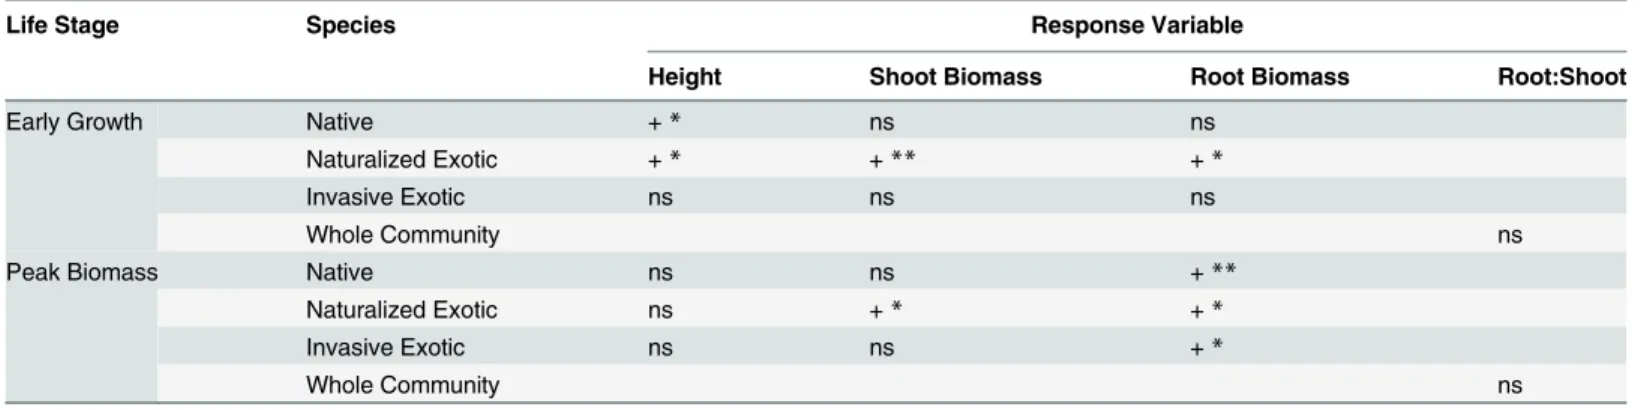 Table 1. Summary of univariate responses to N fertilization by each species during early growth and peak biomass life stages.